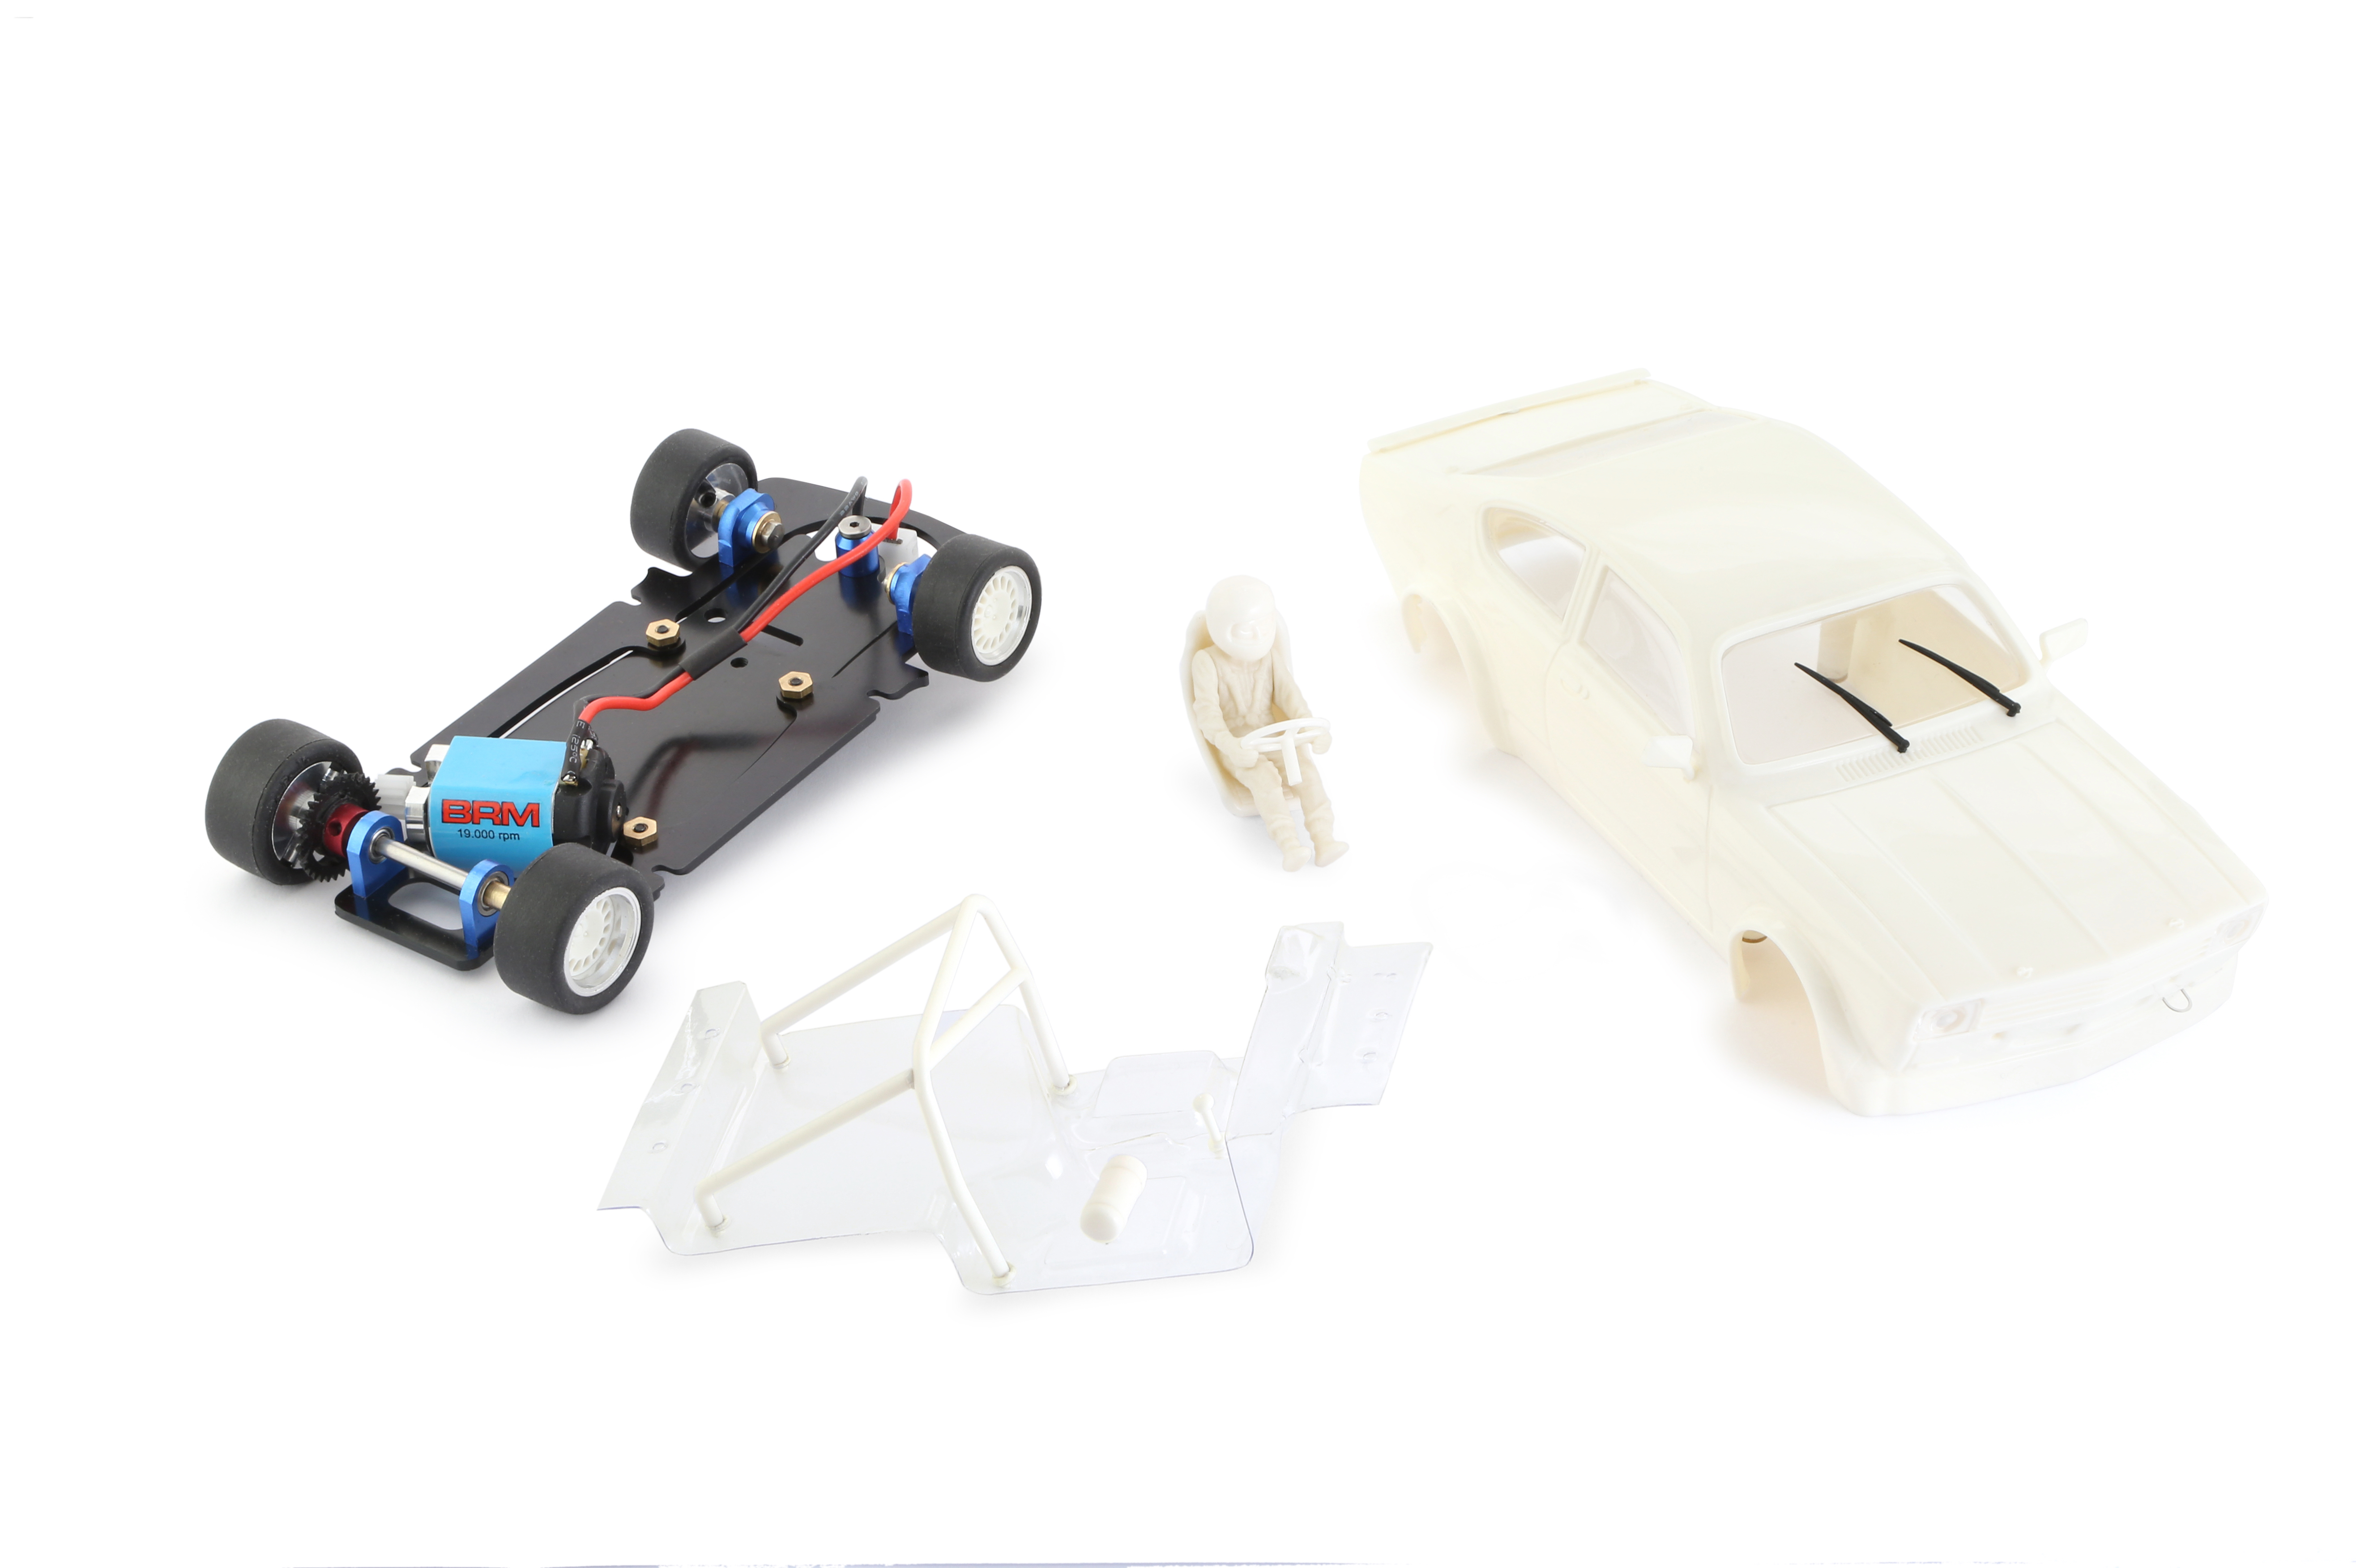 BRM101B Opel Kadett White Kit with complete chassis